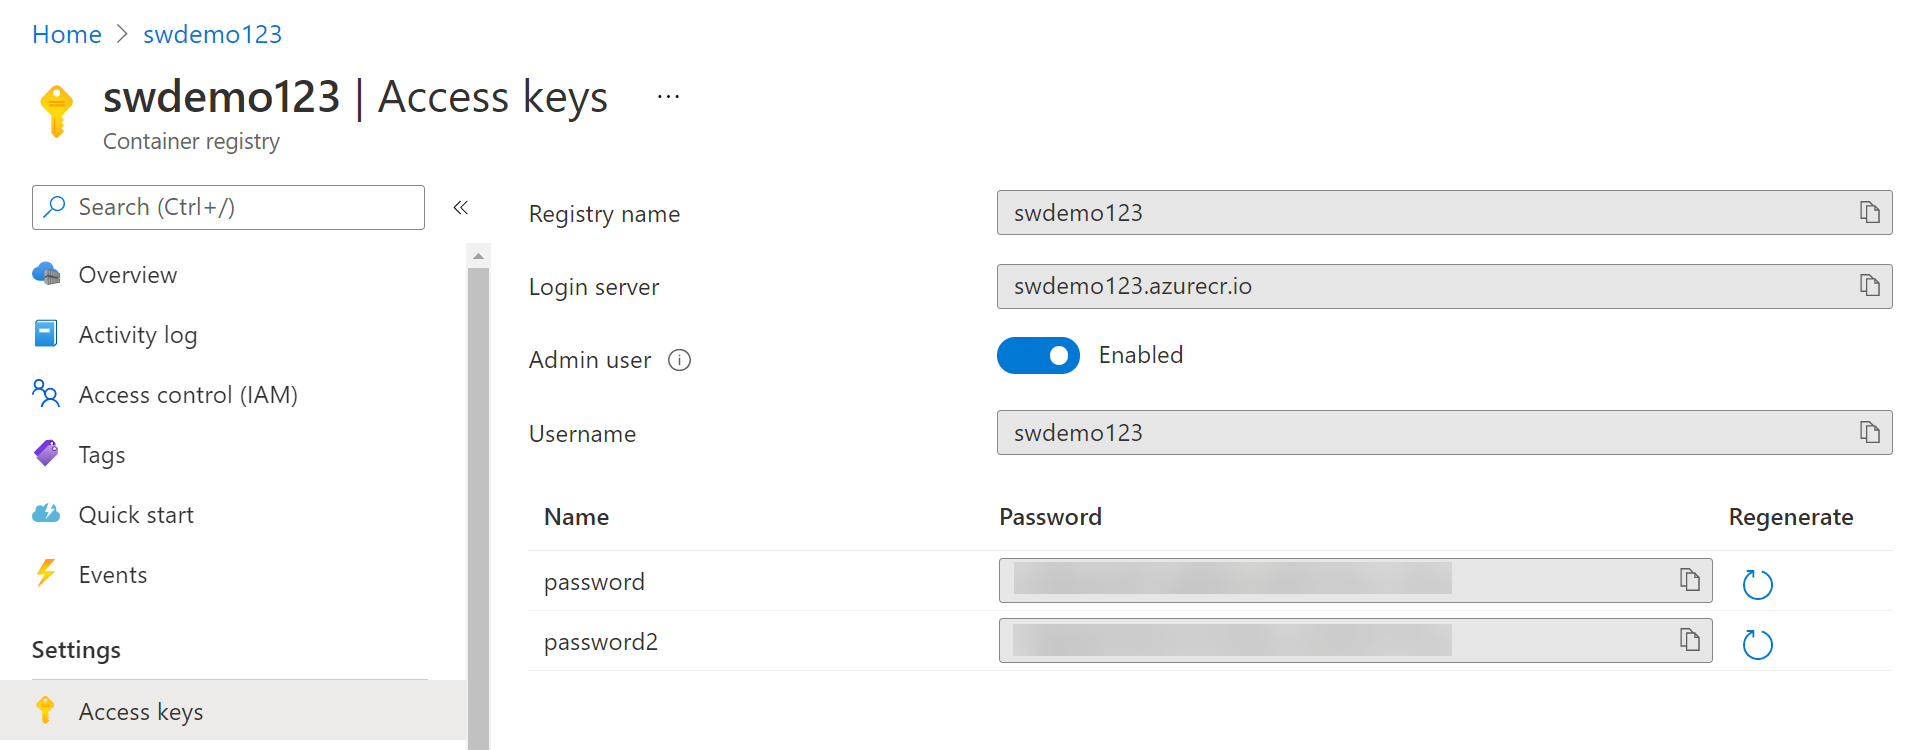 Azure Container Registry Access Keys blade. This is where you copy most of the Secrets from.